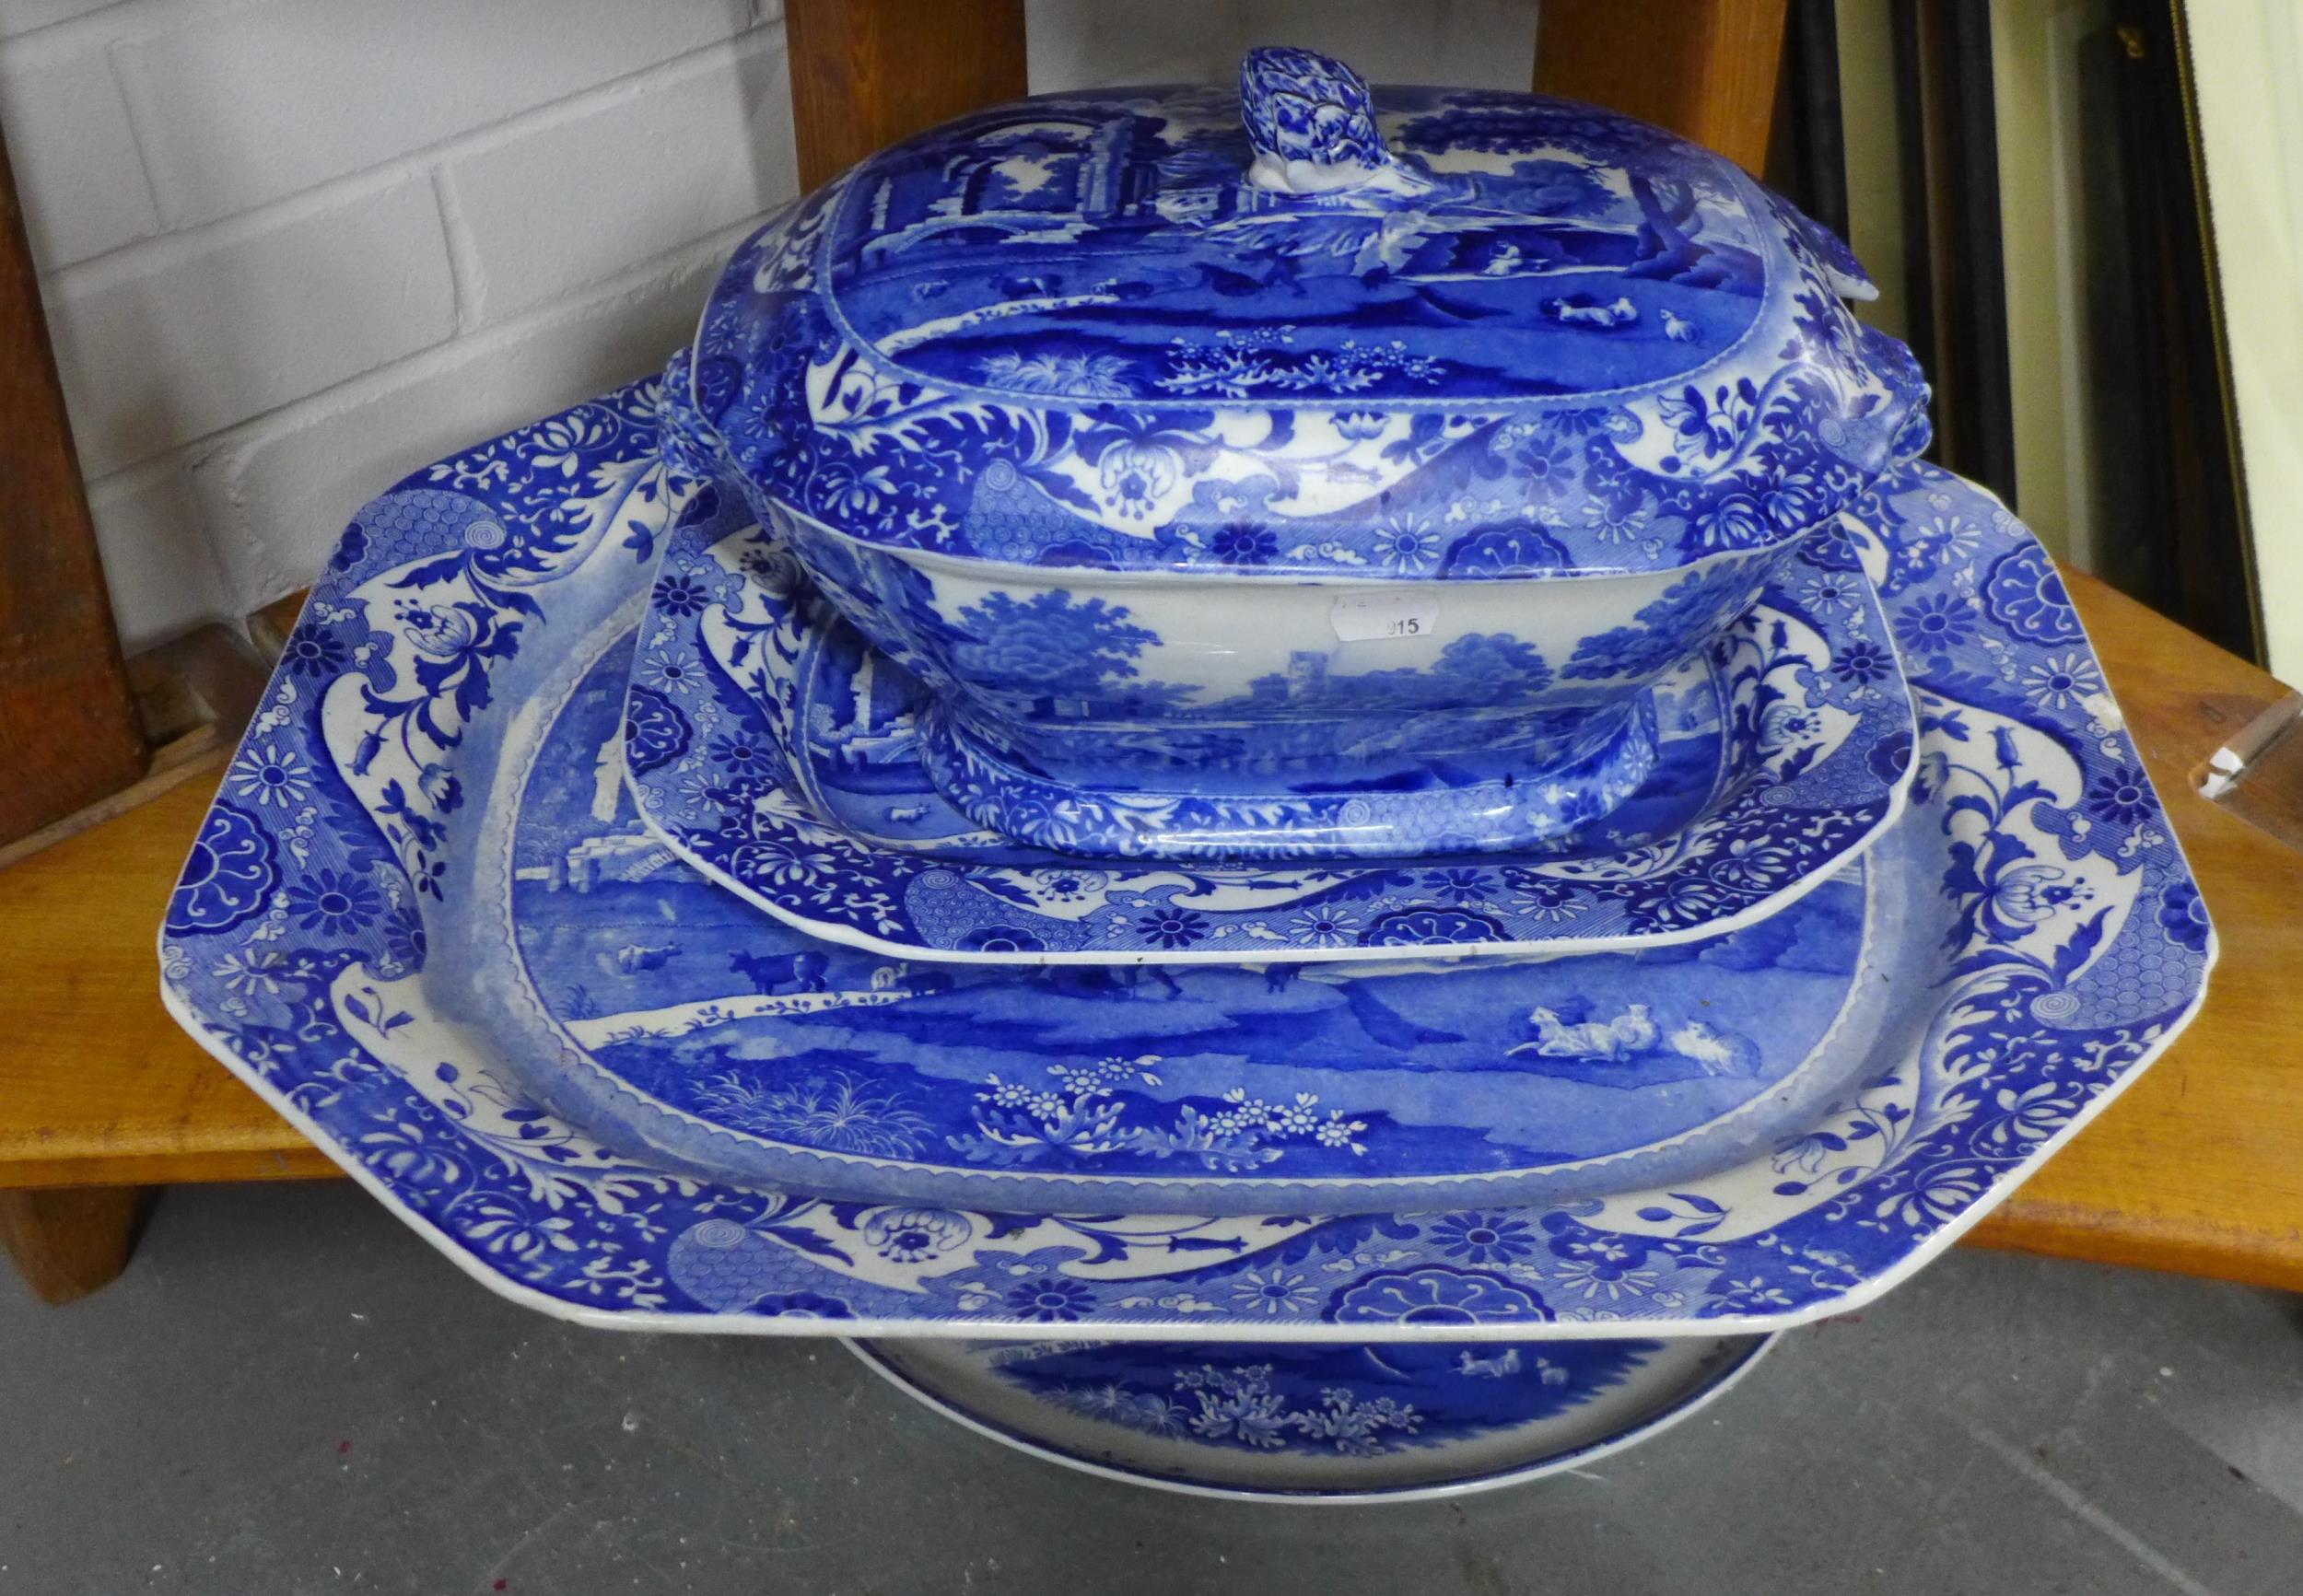 Collection of Spode blue and white Italian patterned table wares, (a lot) - Image 6 of 6